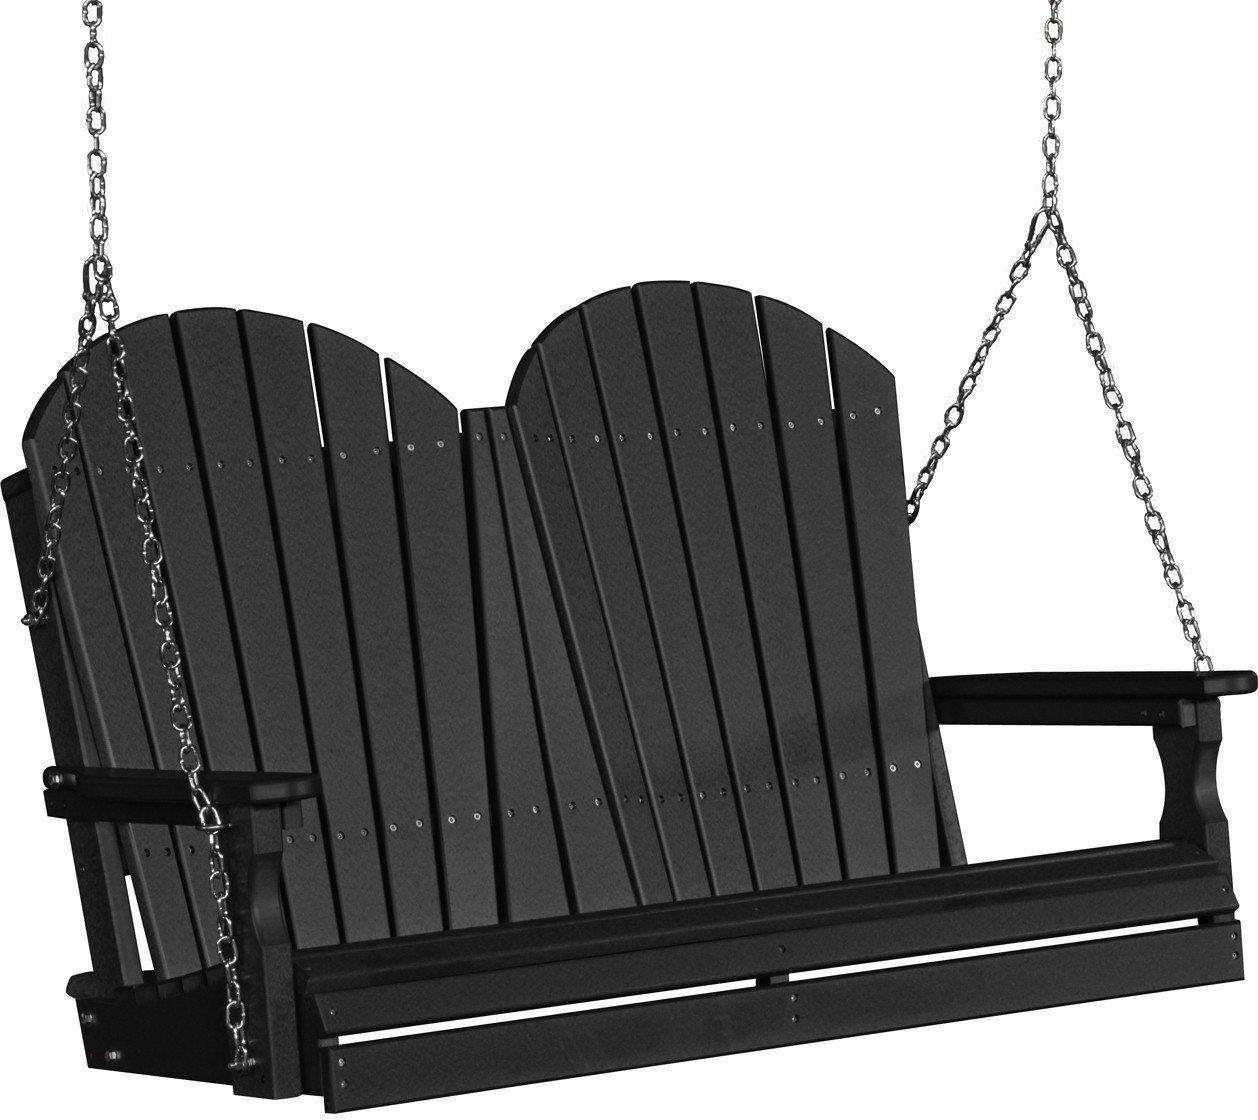 LuxCraft Adirondack 4ft. Recycled Plastic Porch Swing - Black